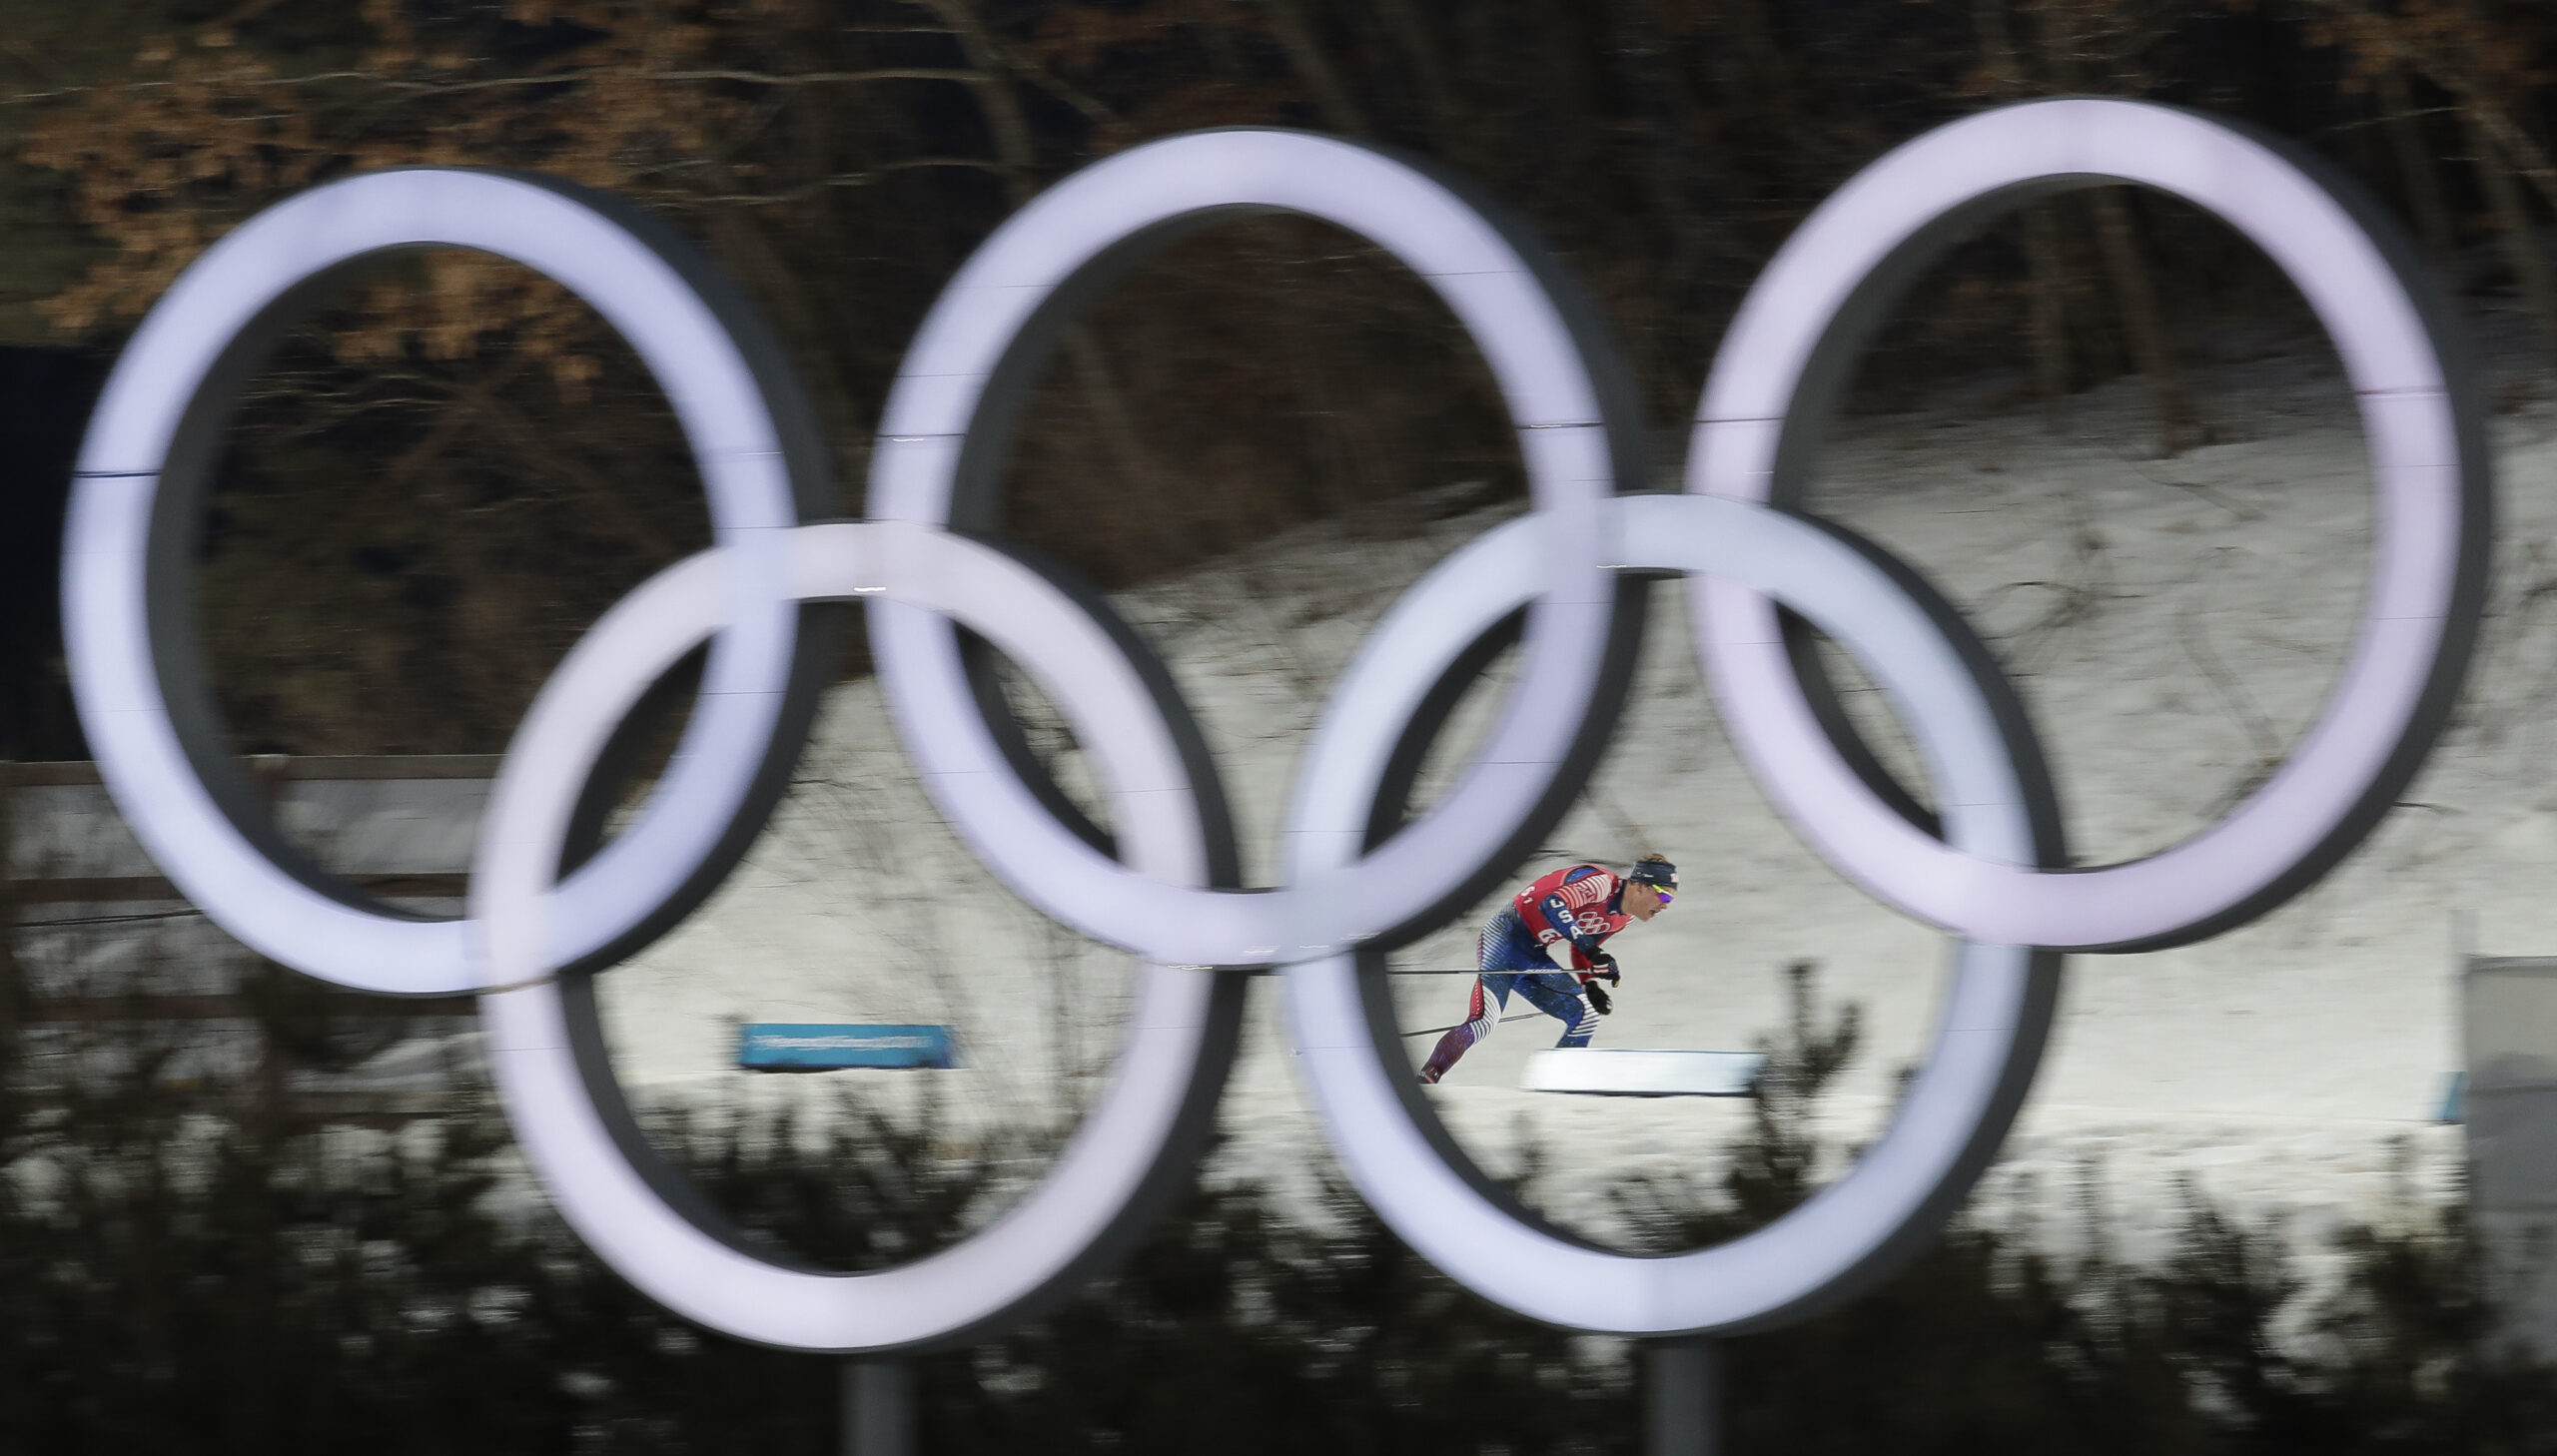 A member of Team USA competes during men's team sprint freestyle semifinal cross-country skiing competition at the 2018 Winter Olympics